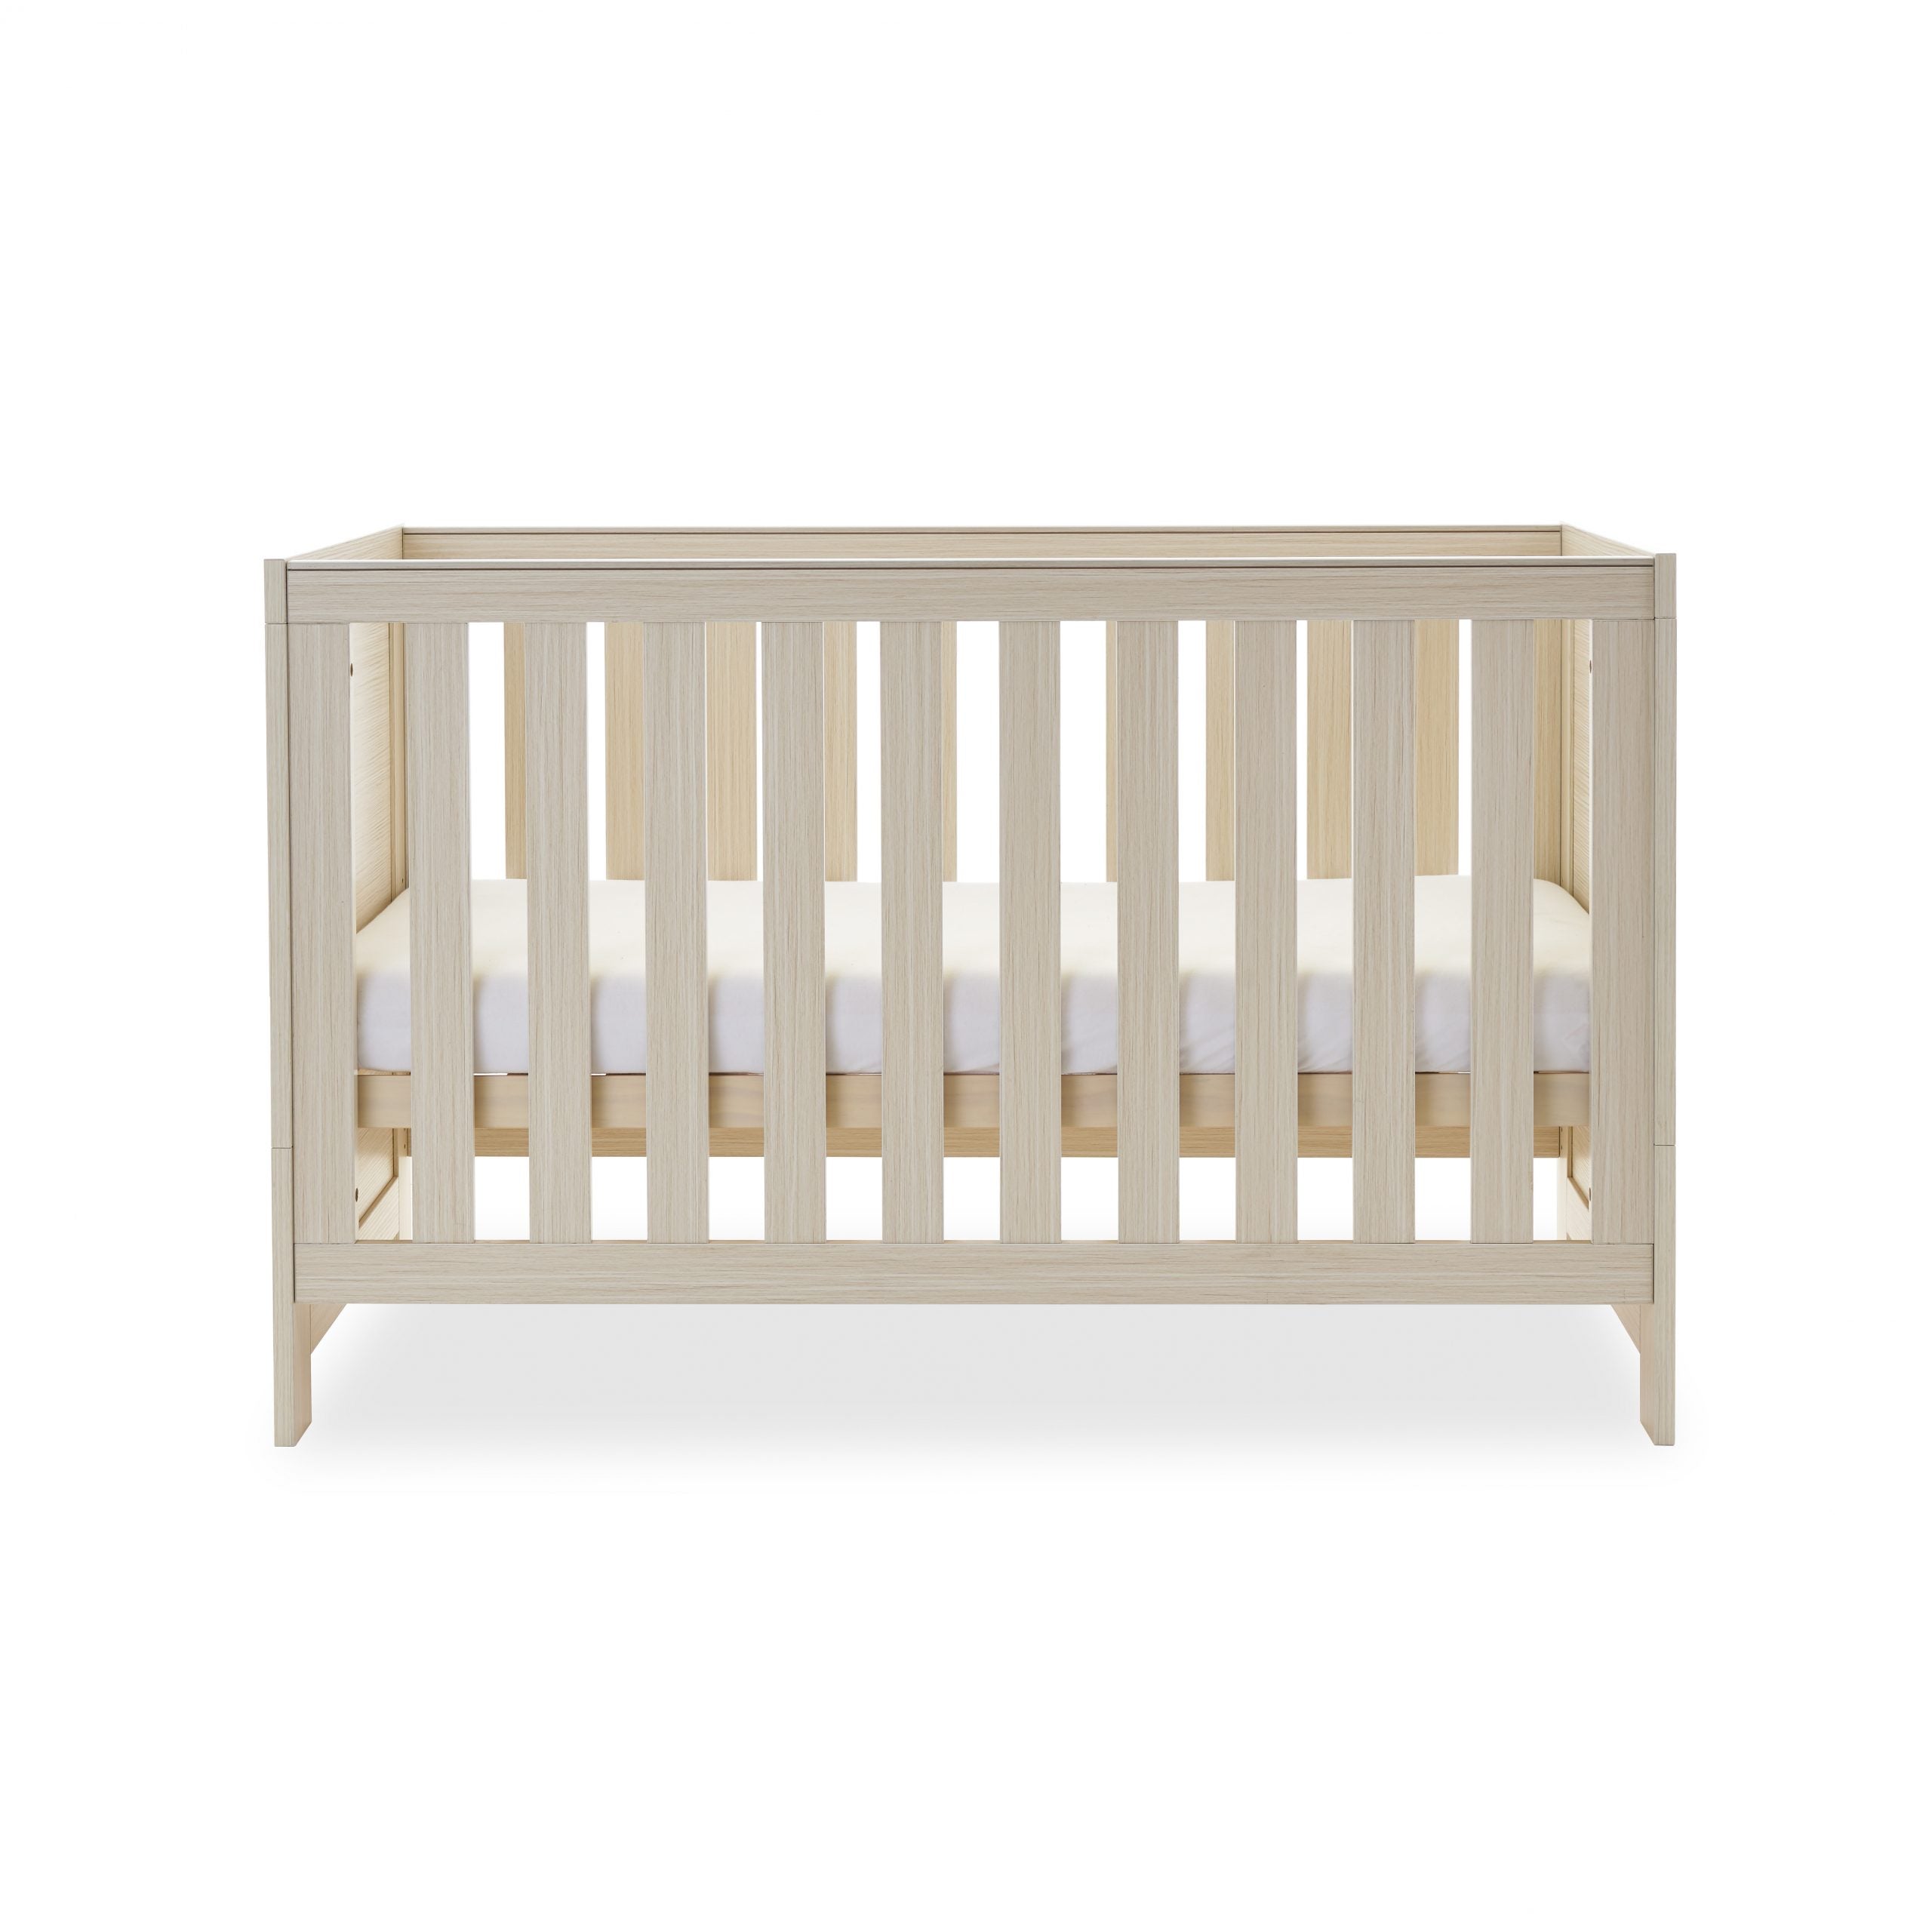 Obaby Nika Cot Bed - Oatmeal -  | For Your Little One